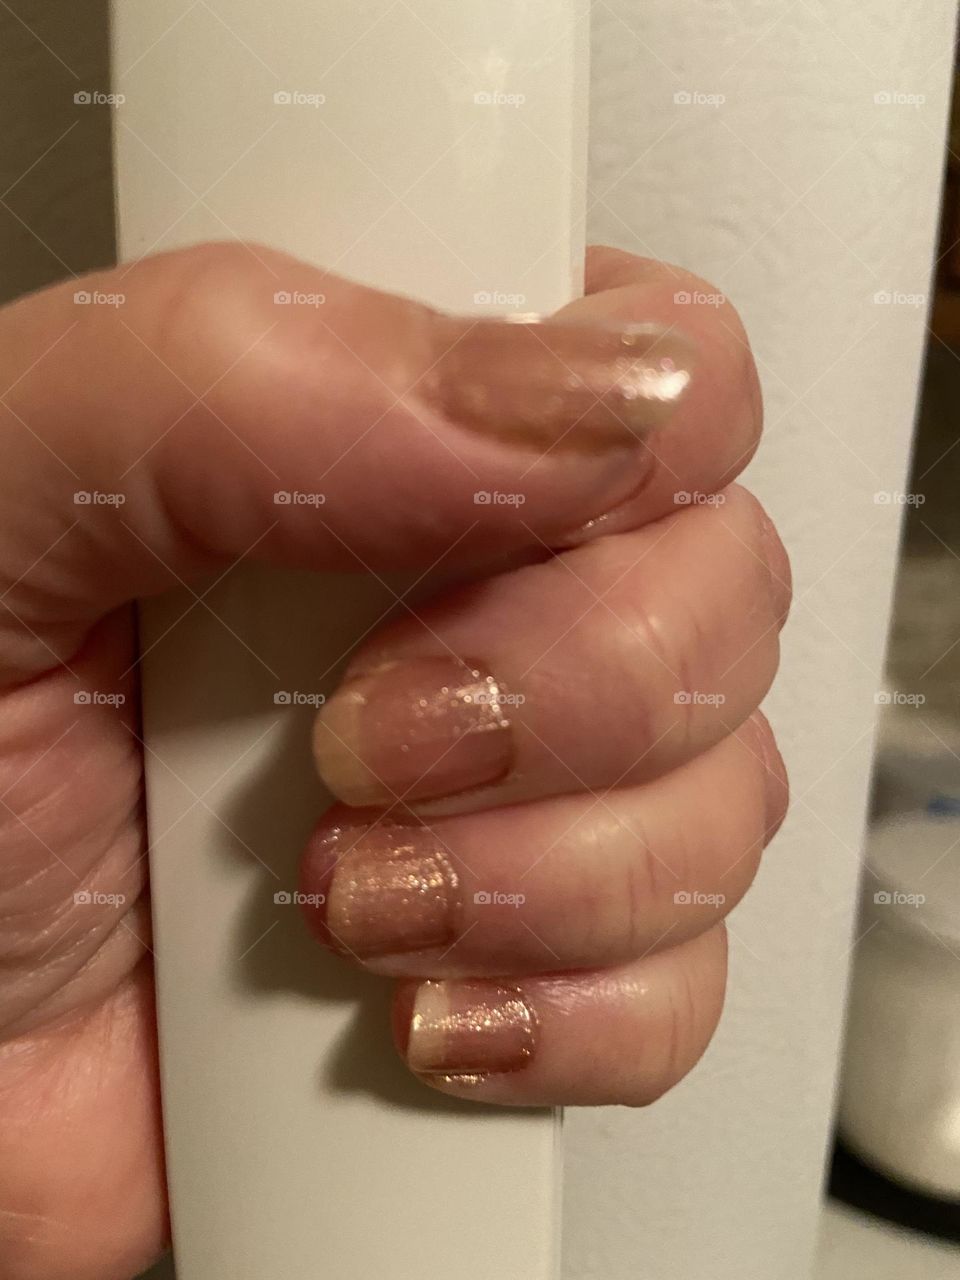 My hand with rose gold polished nails wrapped around a white freezer door handle 